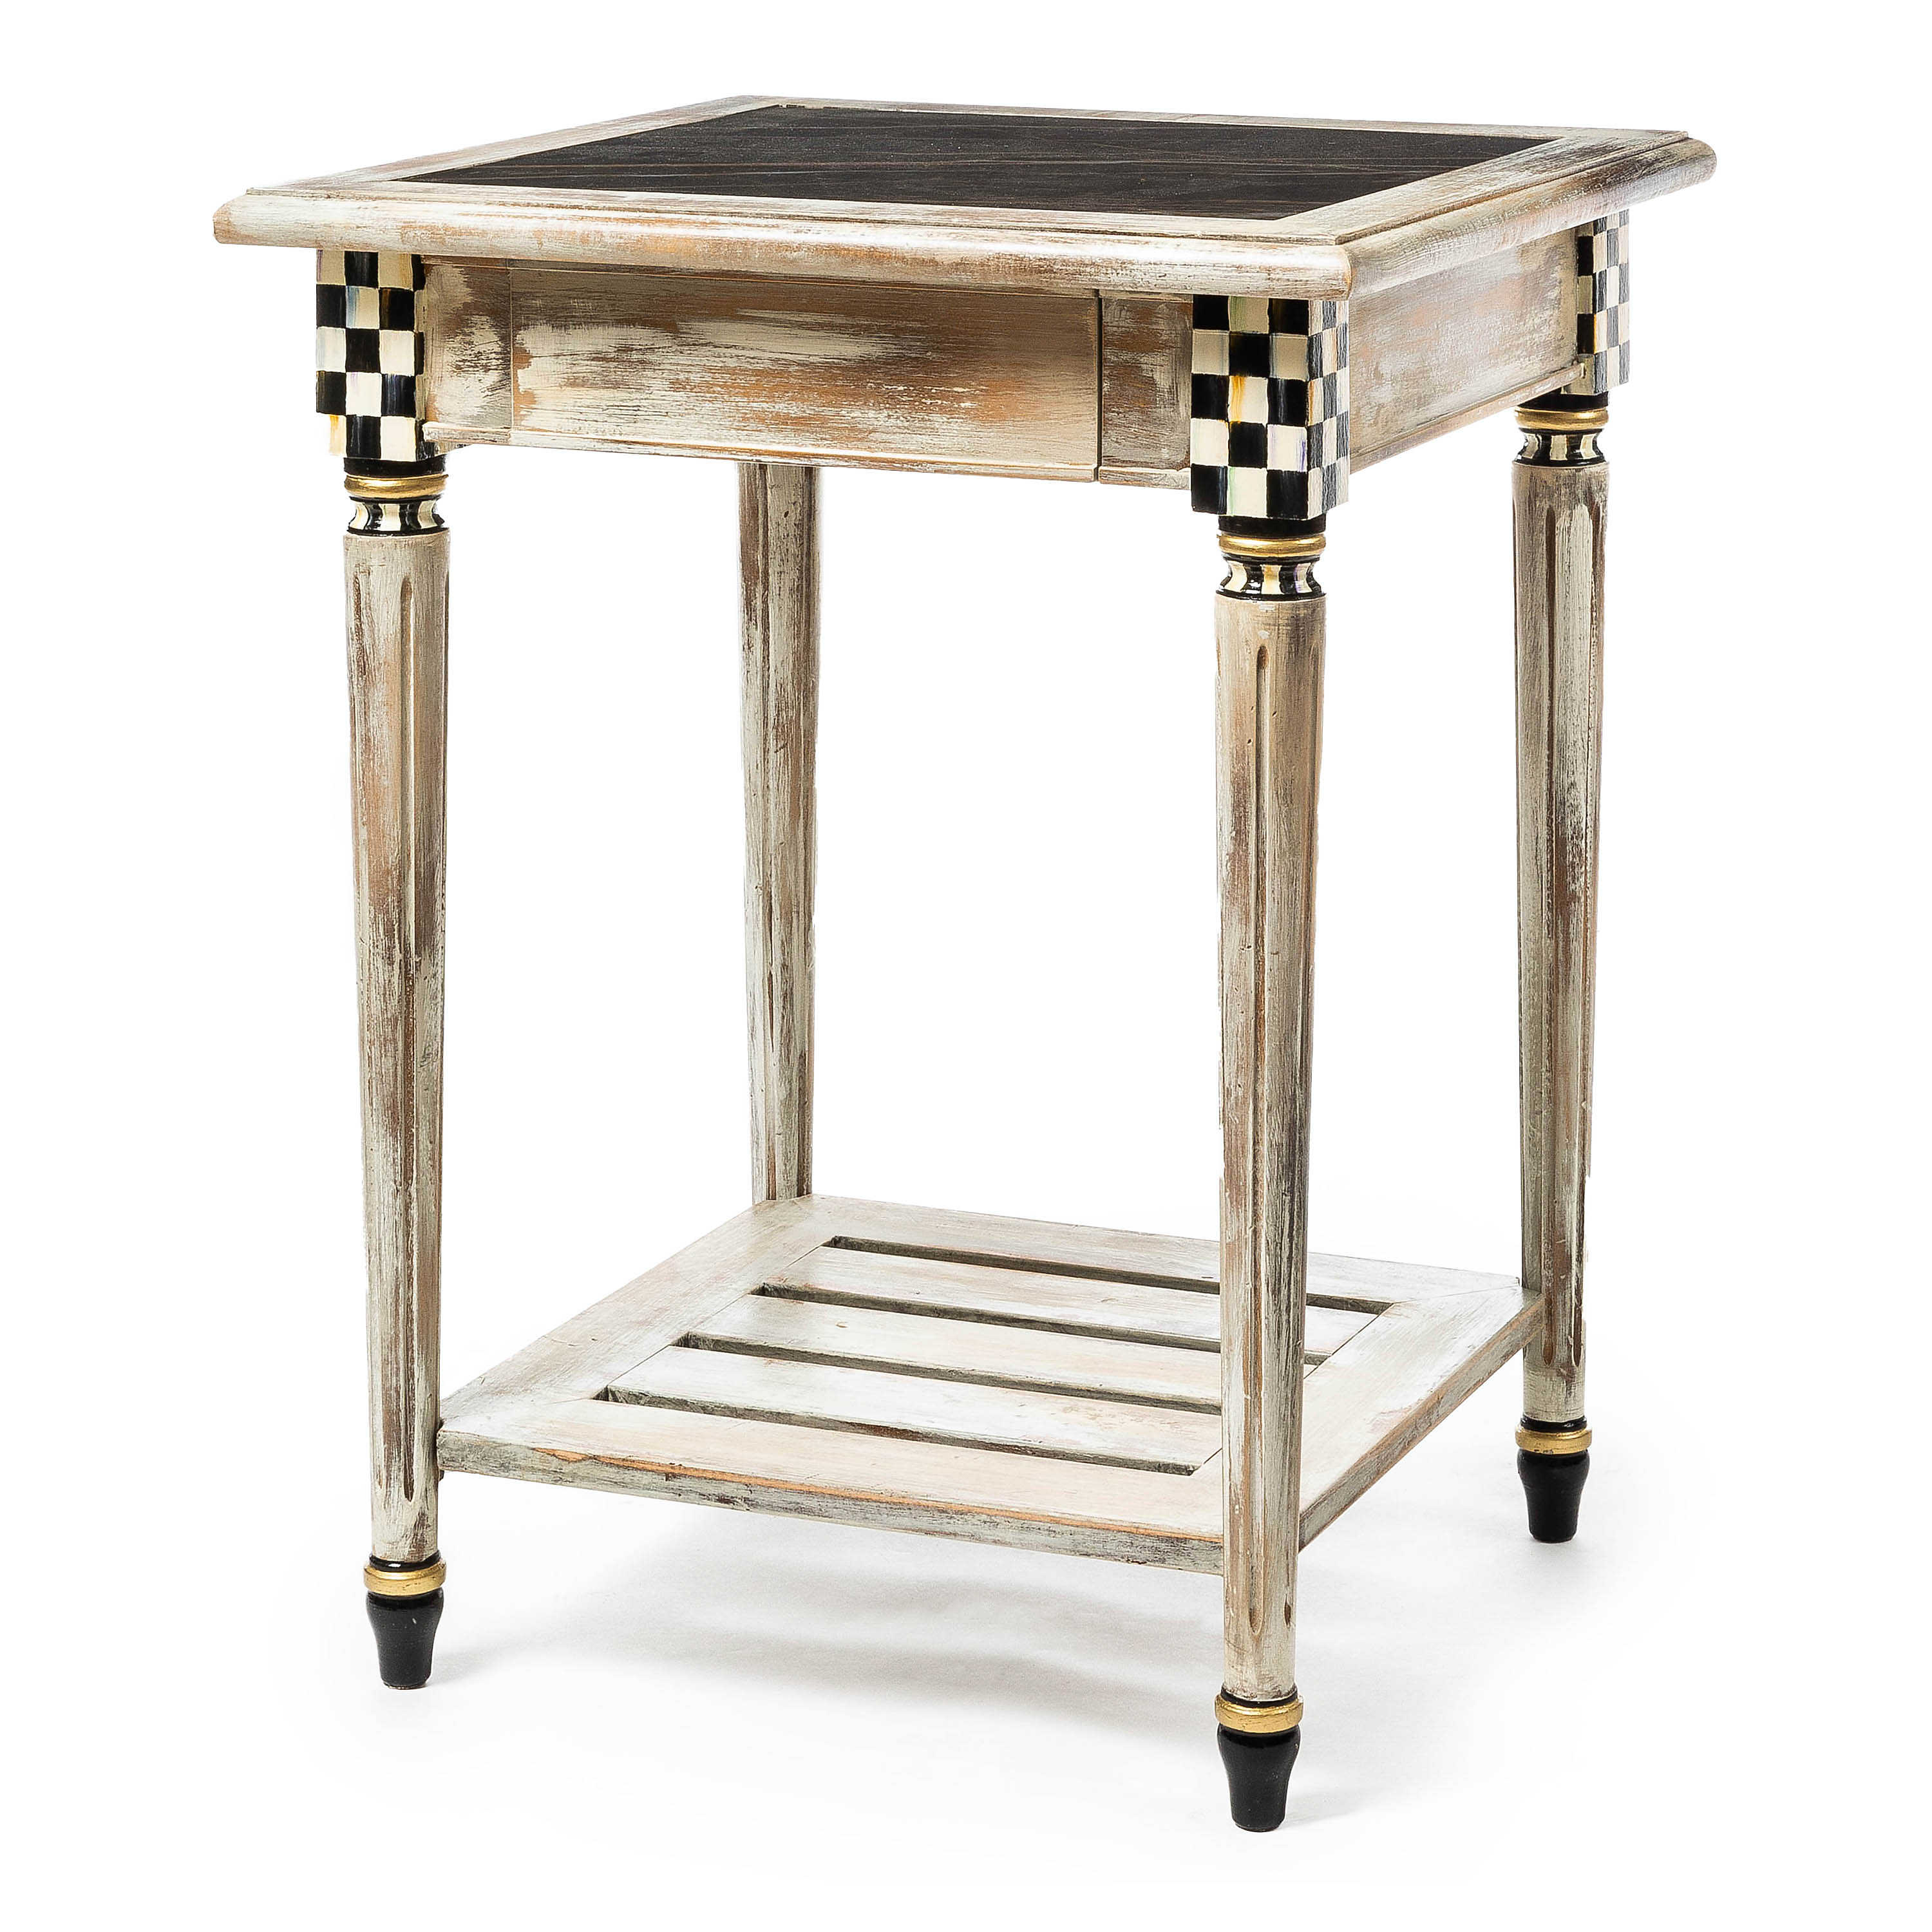 Tuscan Farm Square Accent Table mackenzie-childs Panama 0